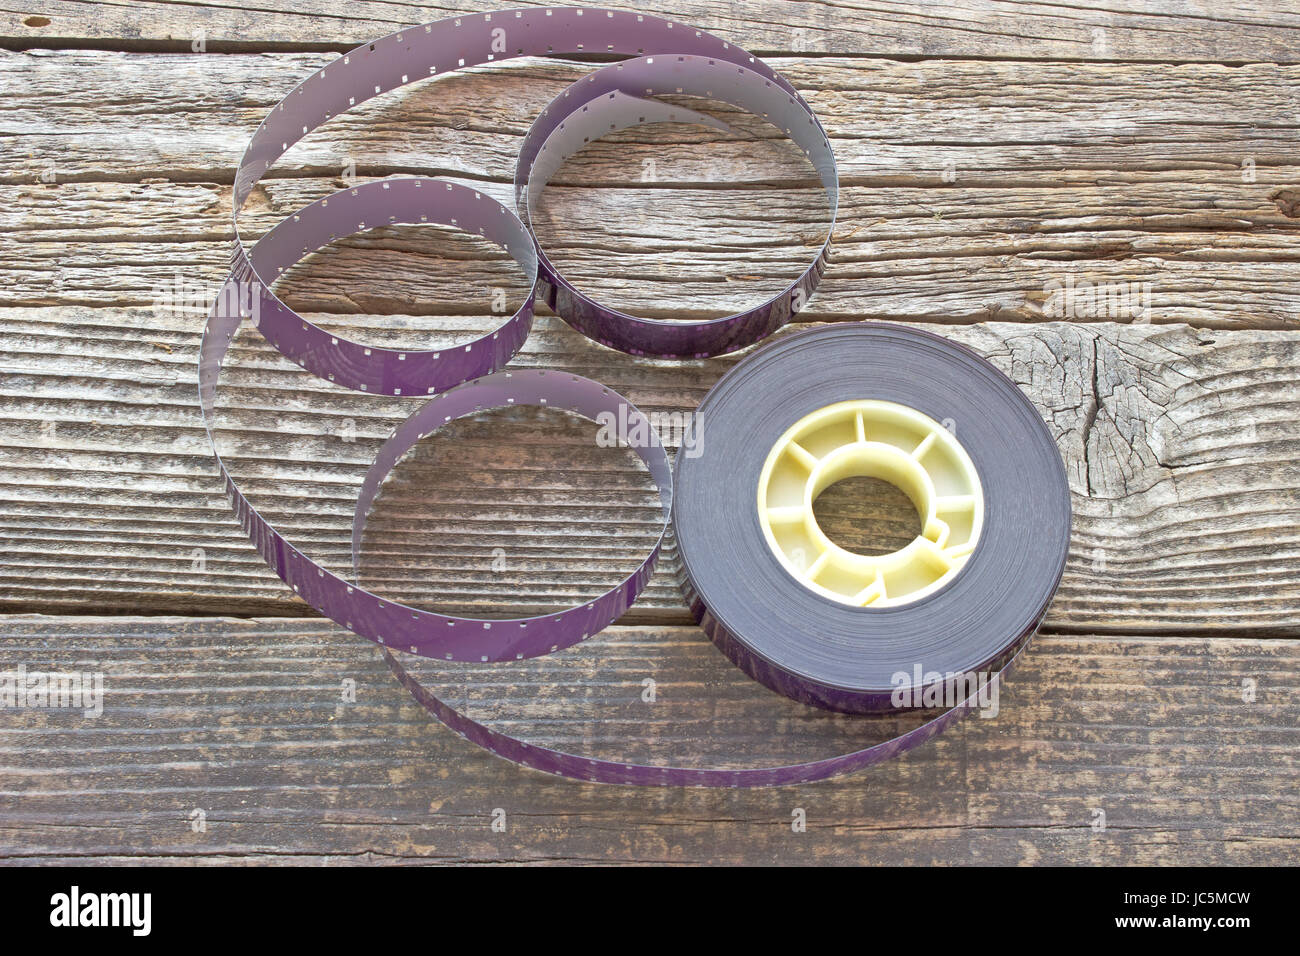 16 mm film reel on wooden background Stock Photo - Alamy